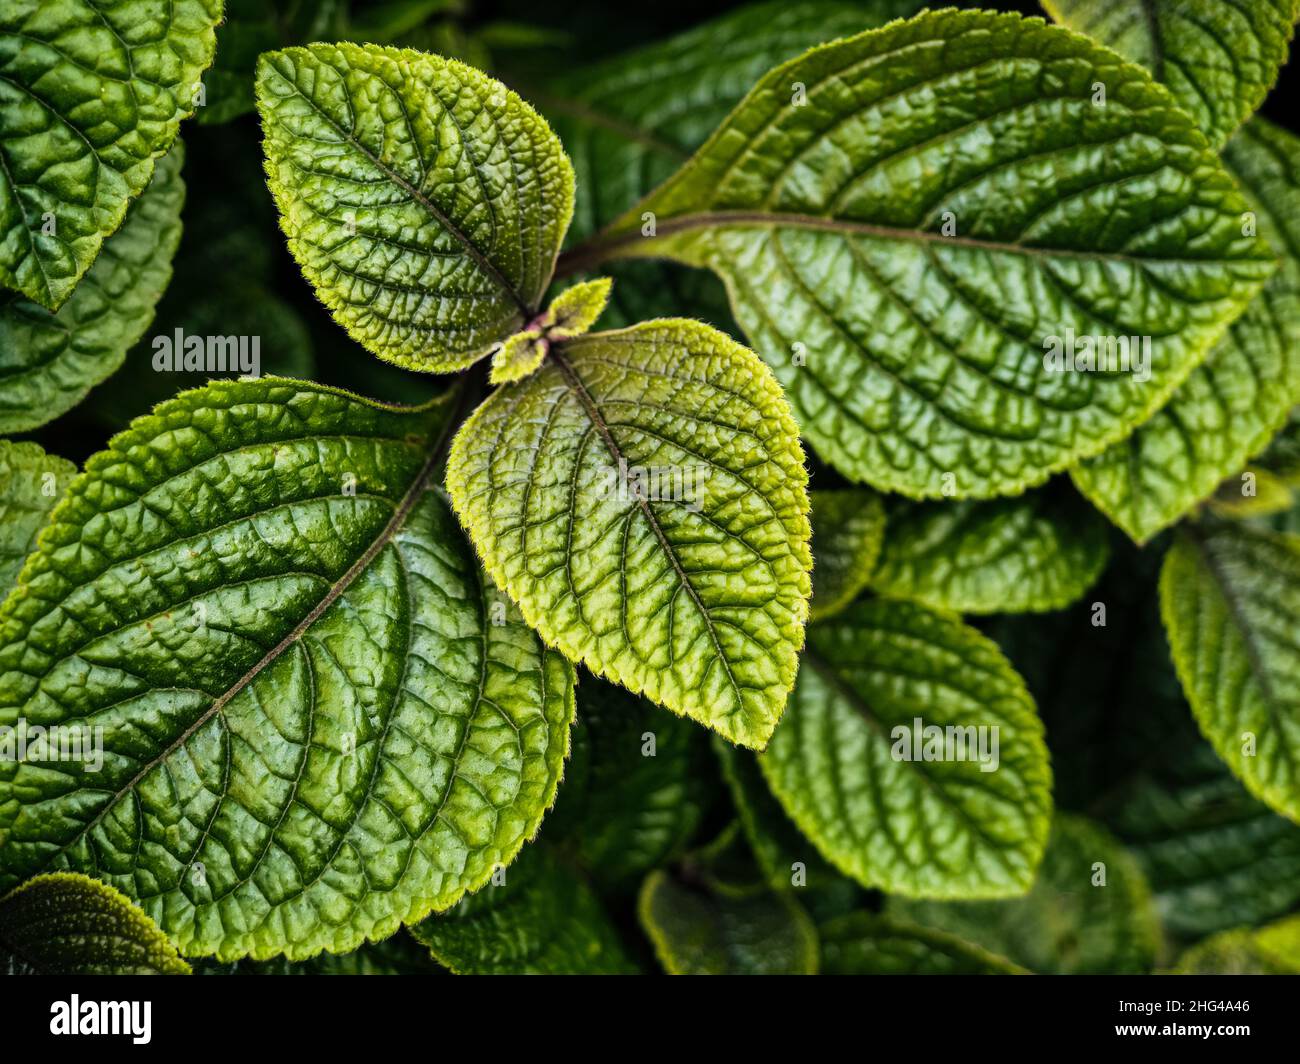 green textured leaves of pilea mollis or moon valley plant, natural background close up photo Stock Photo